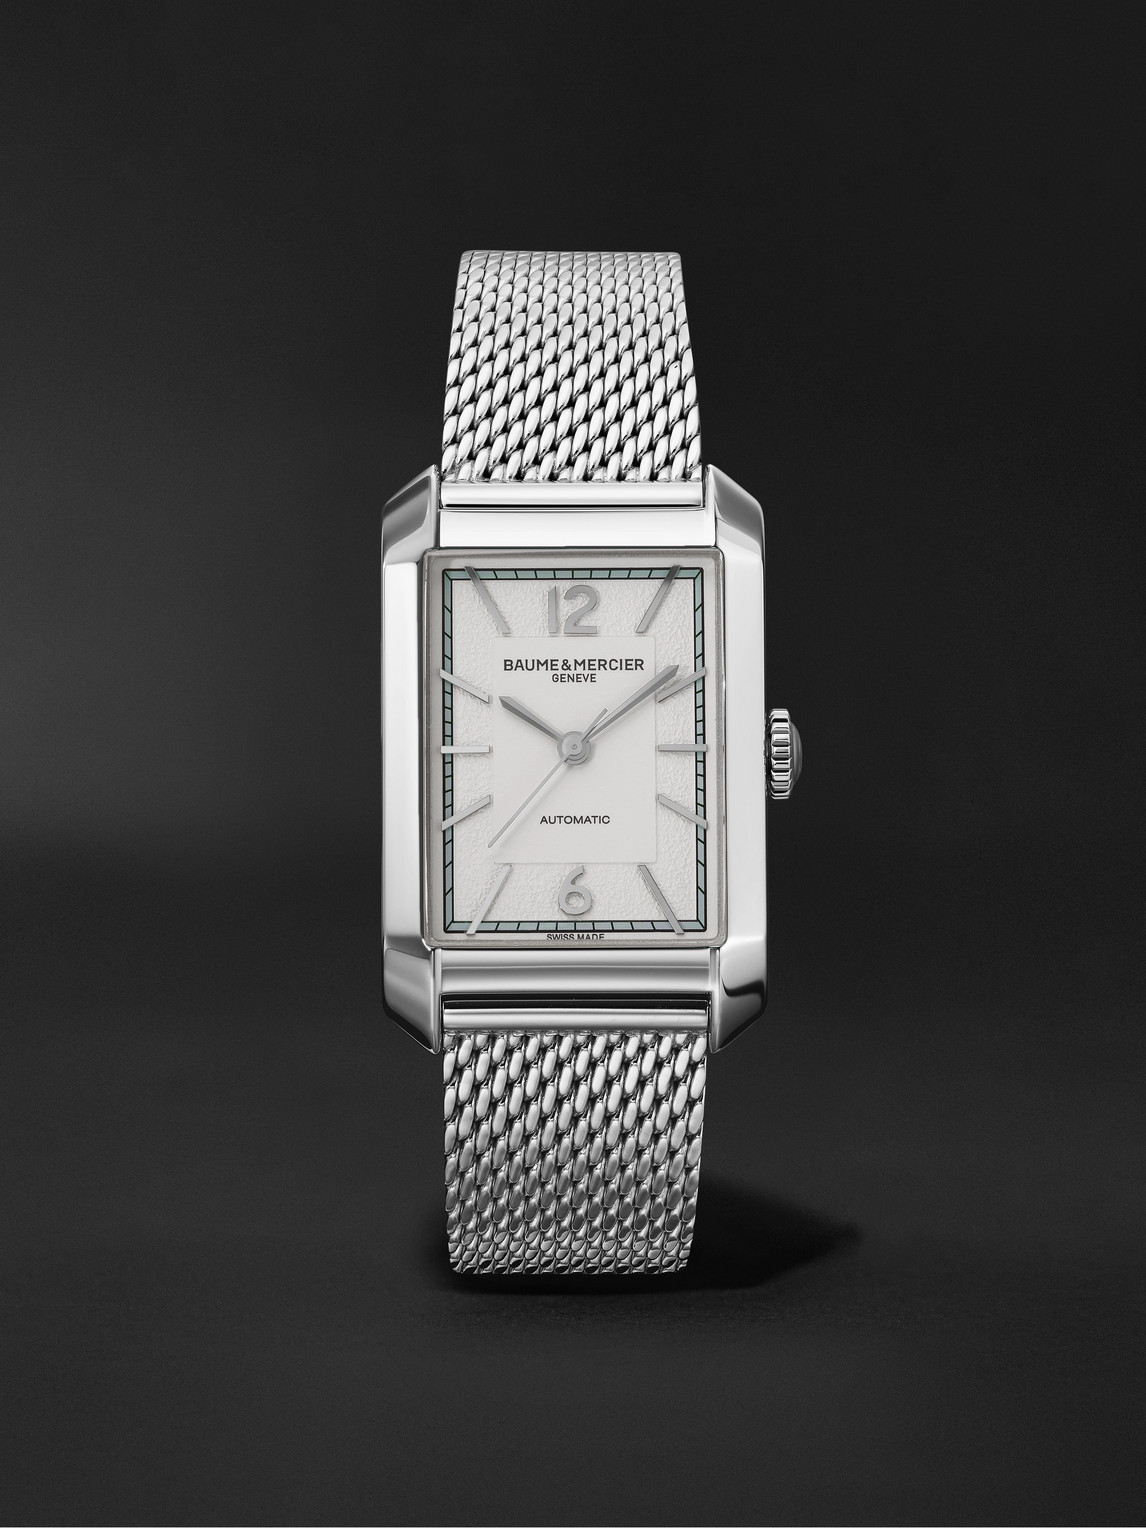 Baume & Mercier Hampton Automatic 27.5mm Stainless Steel Watch, Ref. No. M0a10672 In White